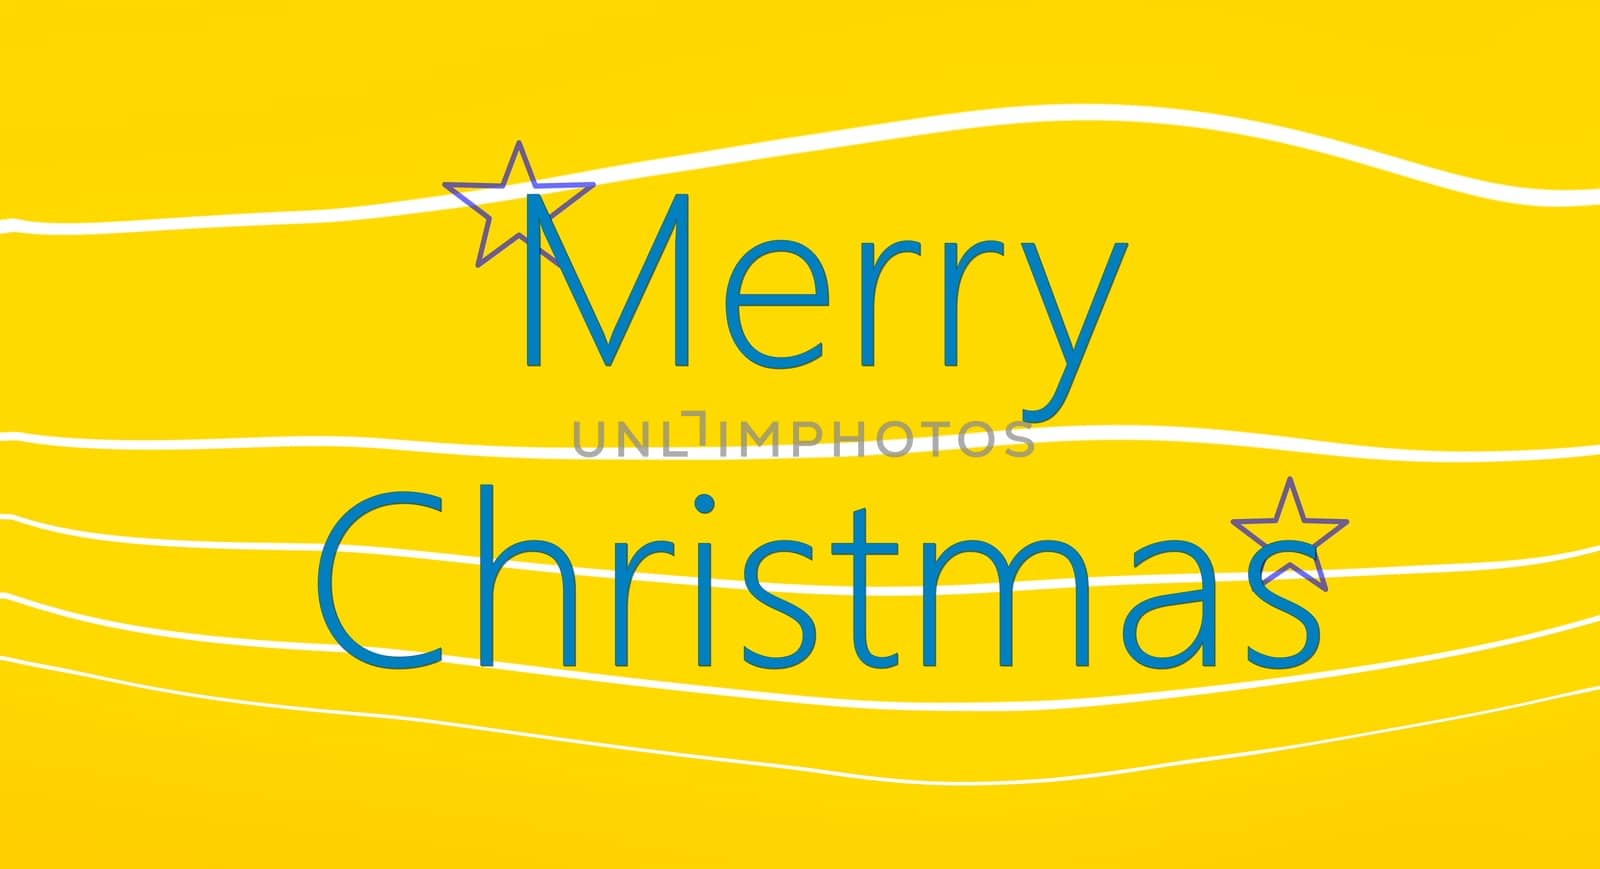 Merry Christmas card on yellow background with white lines by nehru